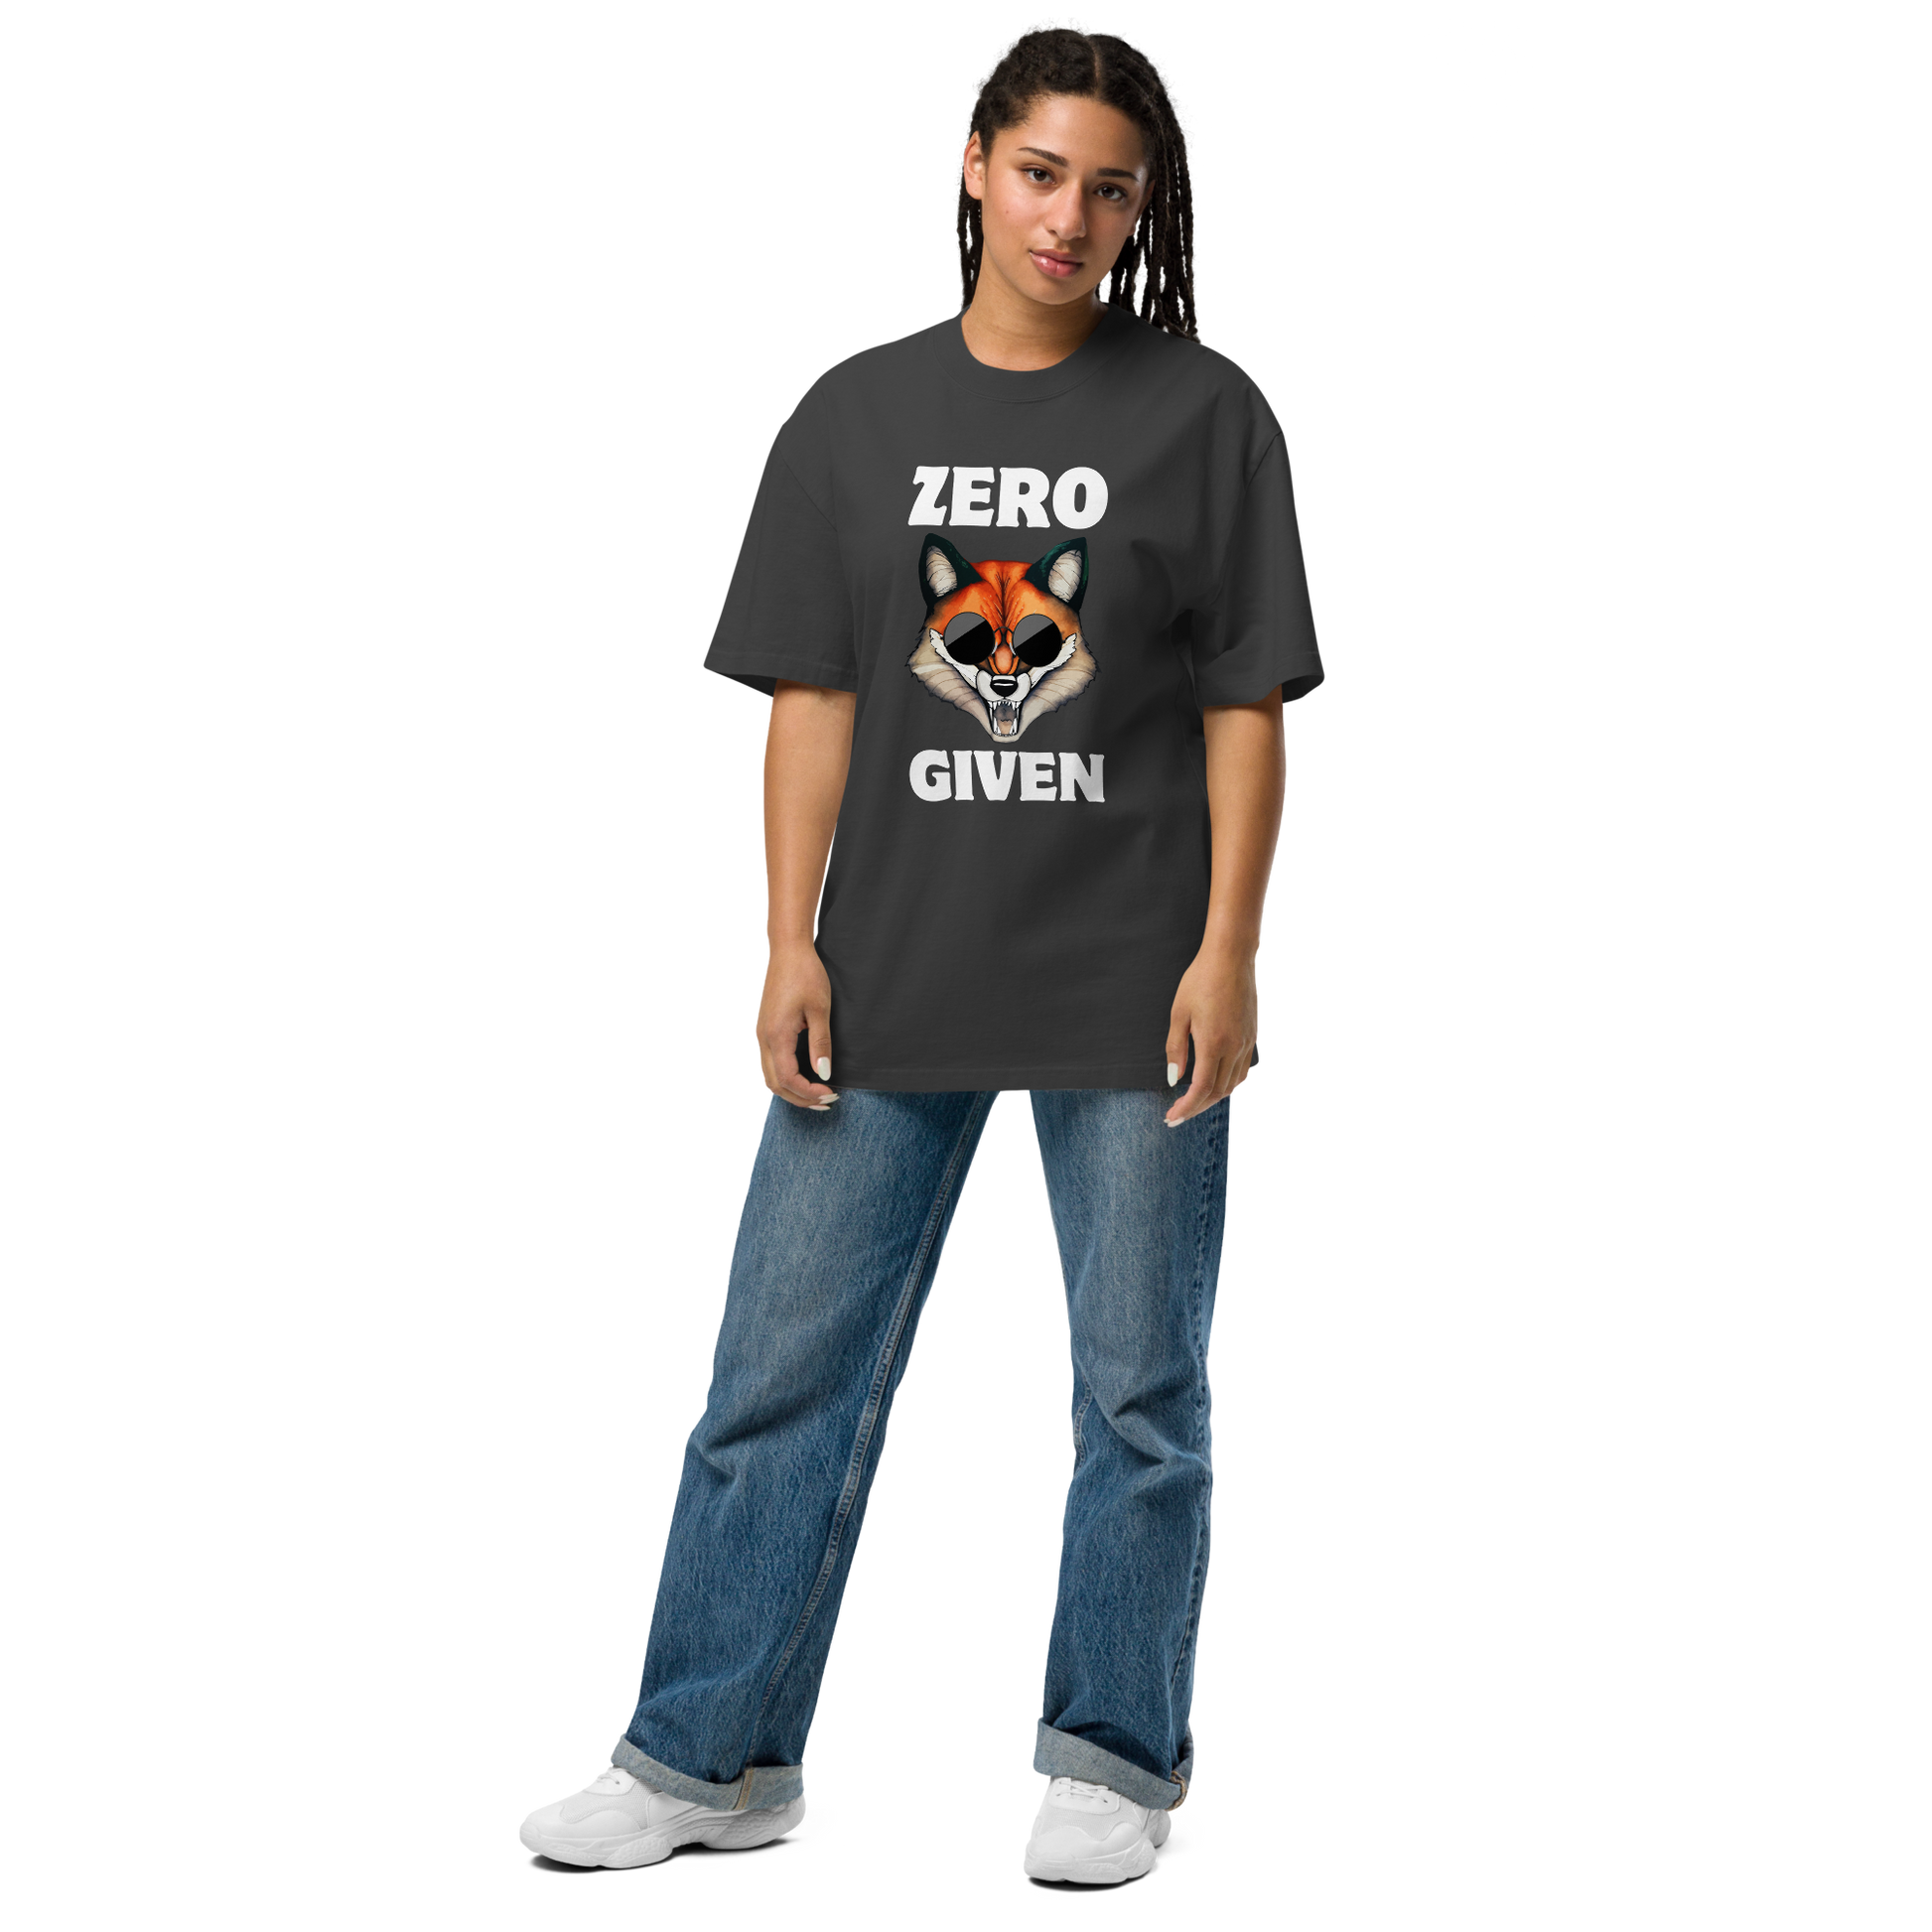 Woman wearing a Faded Black Fox Oversized T-Shirt featuring a Zero Fox Given graphic on the chest - Funny Graphic Fox Oversized Tees - Boozy Fox